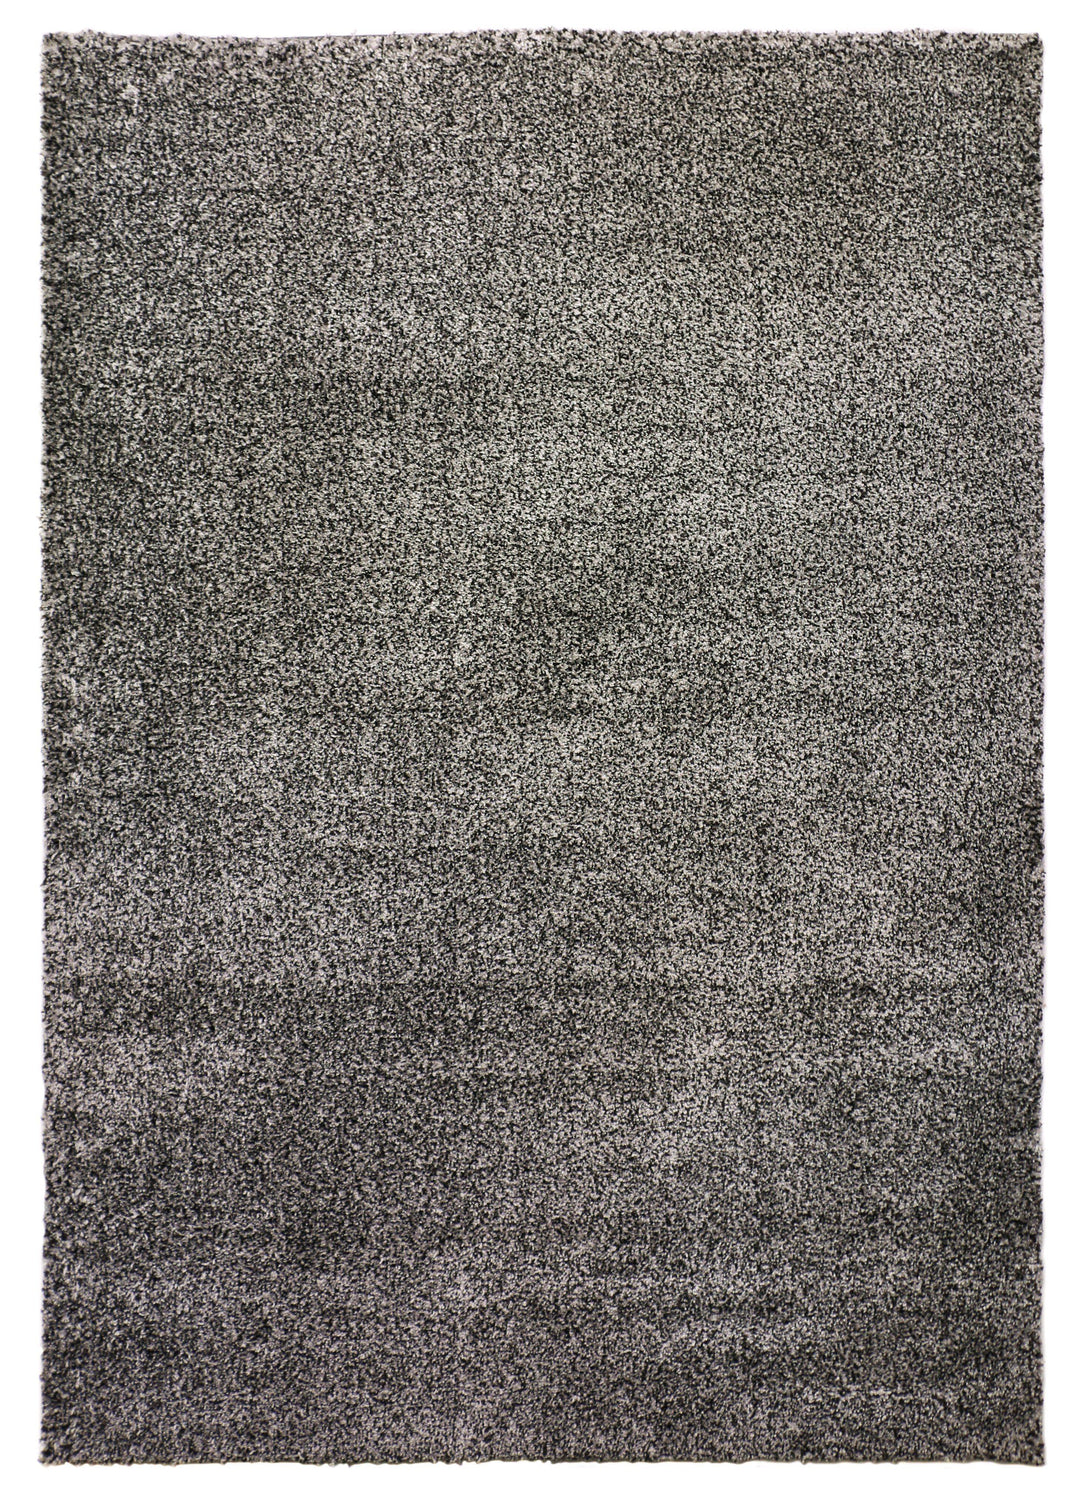 Draco Modern Beige and Grey Area Rug 200x290CM - 6'6''x9'5''FT – The Rugs  Outlet Canada